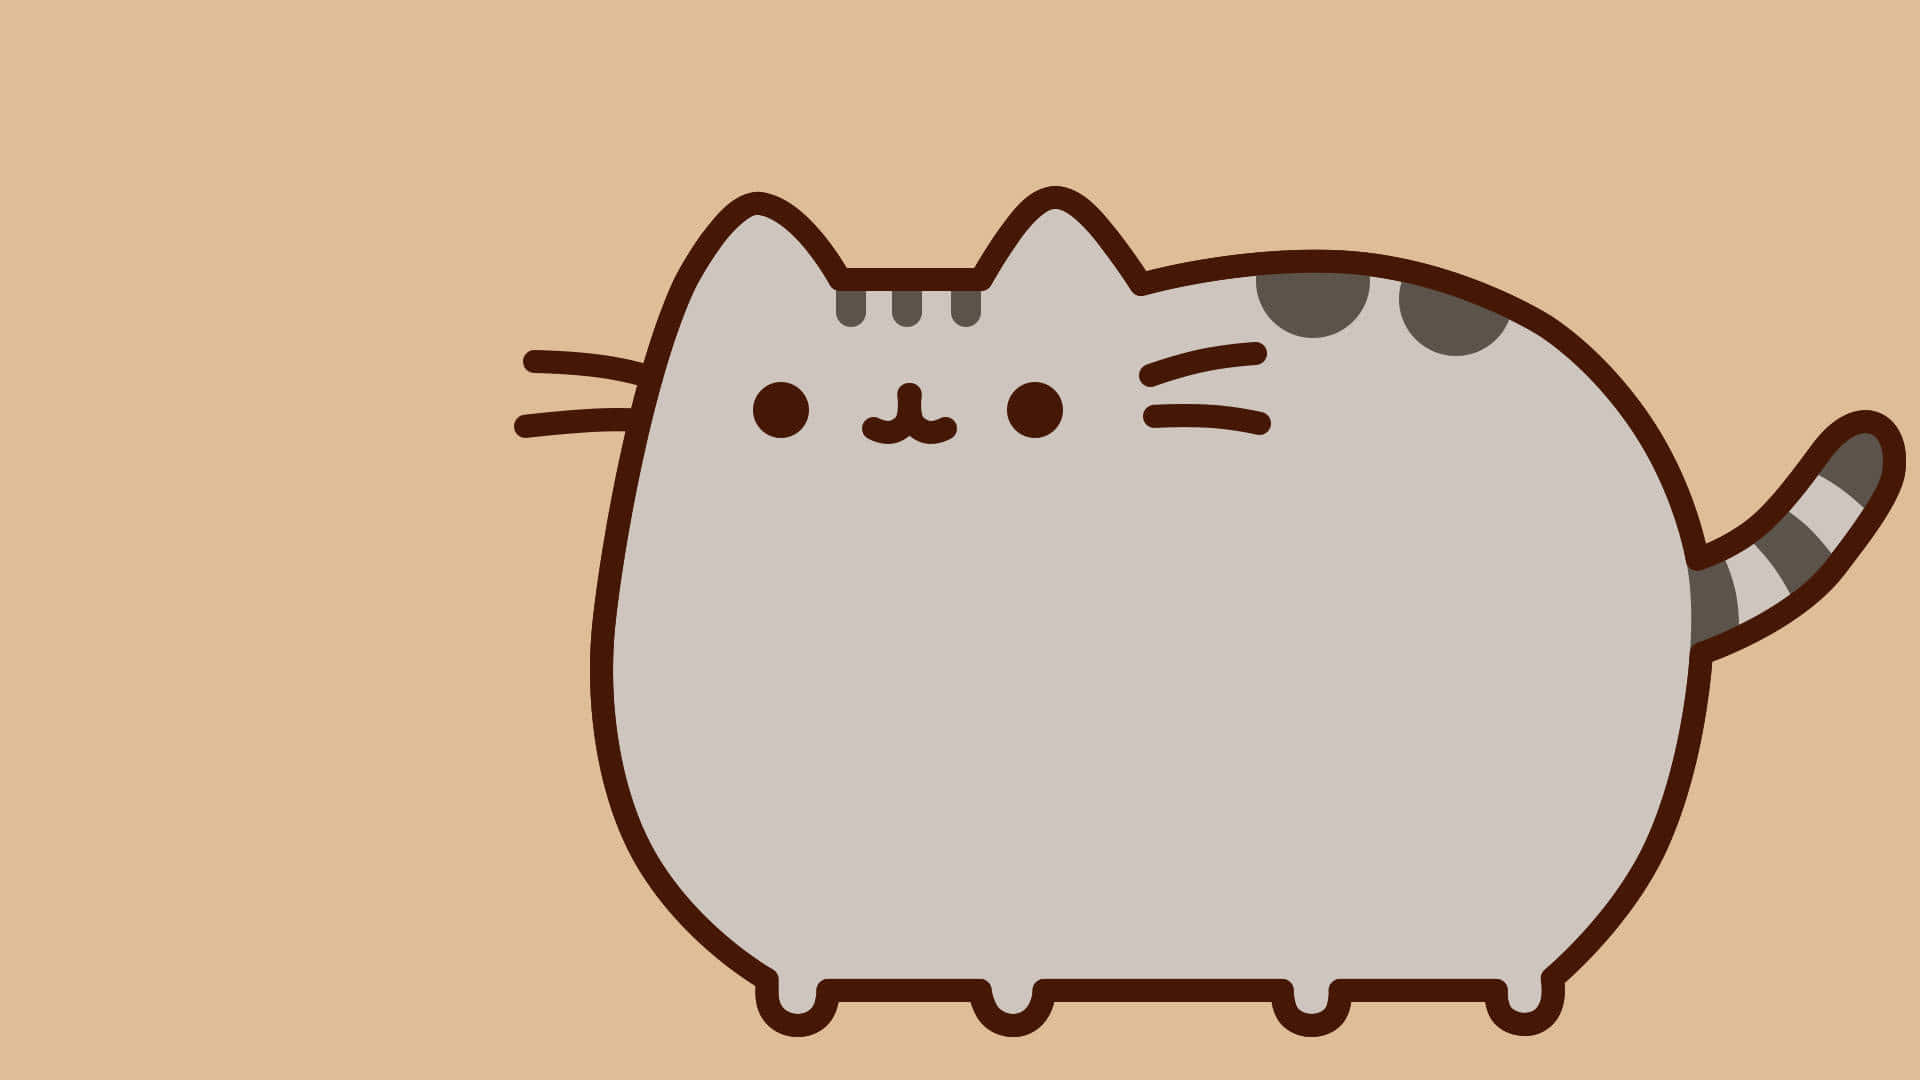 Get your work done with Pusheen PC Wallpaper